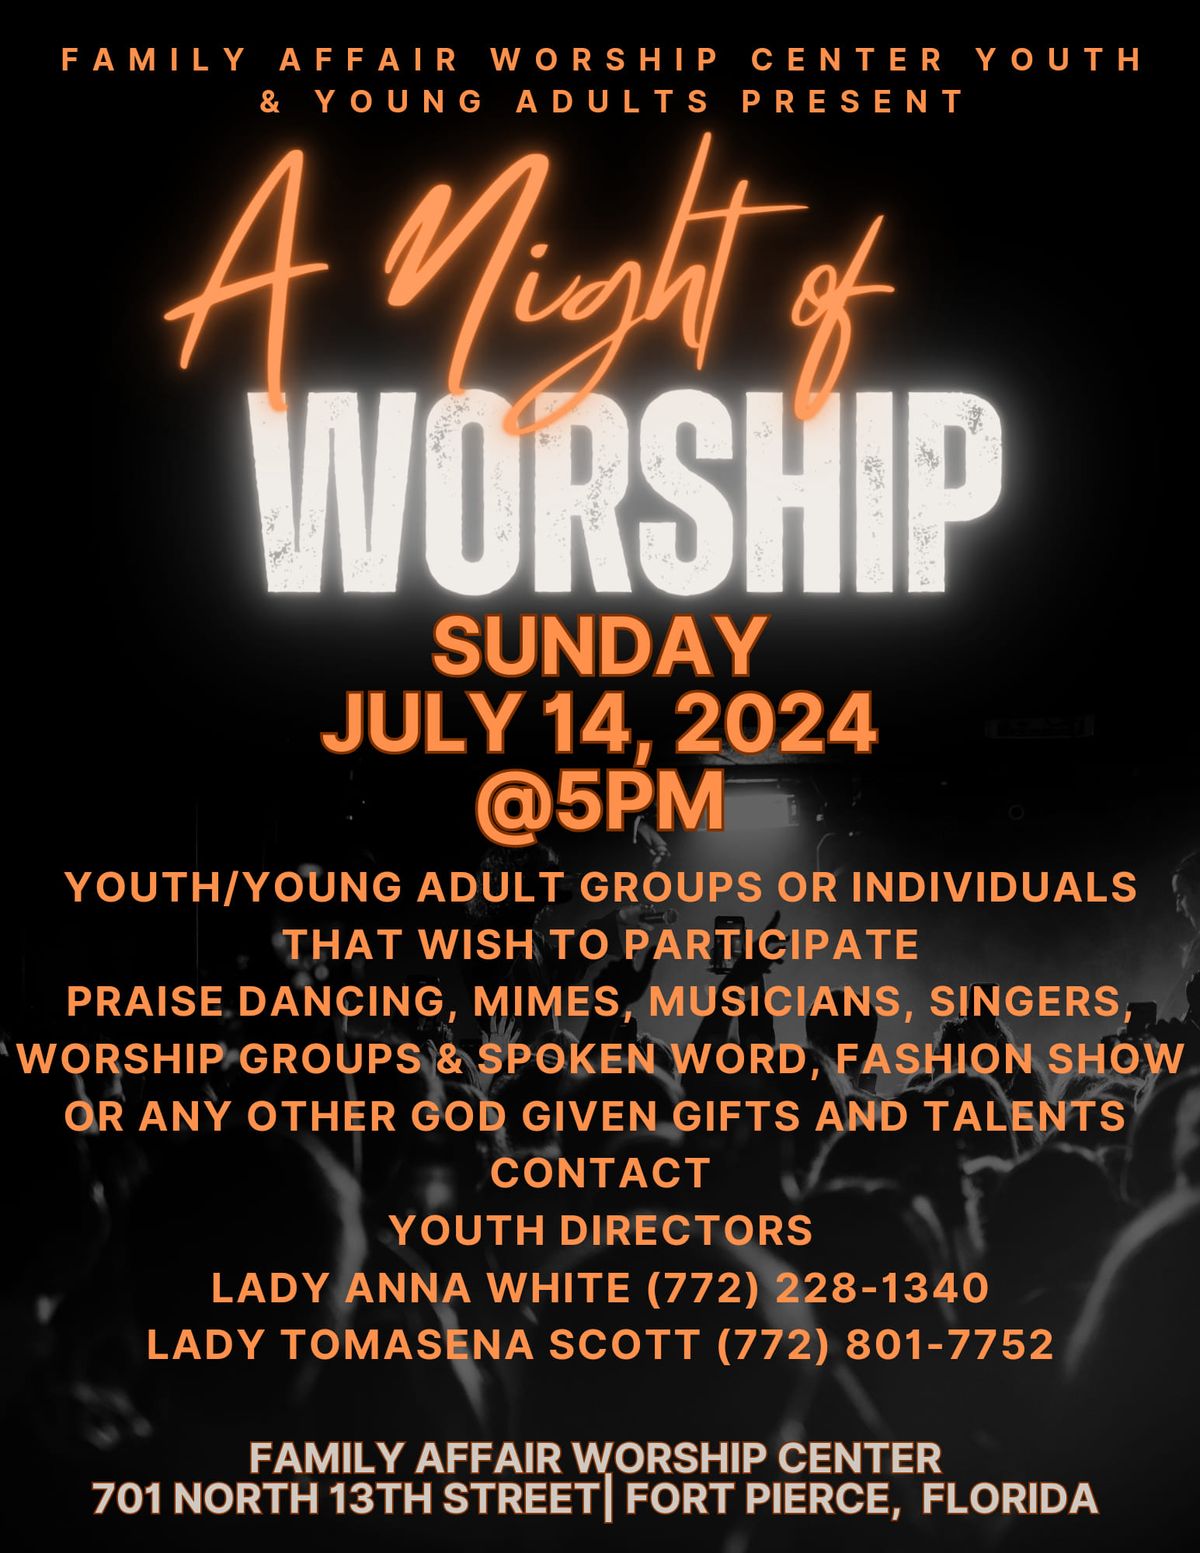 FAWC Youth and Young Adults "A Night of Worship"